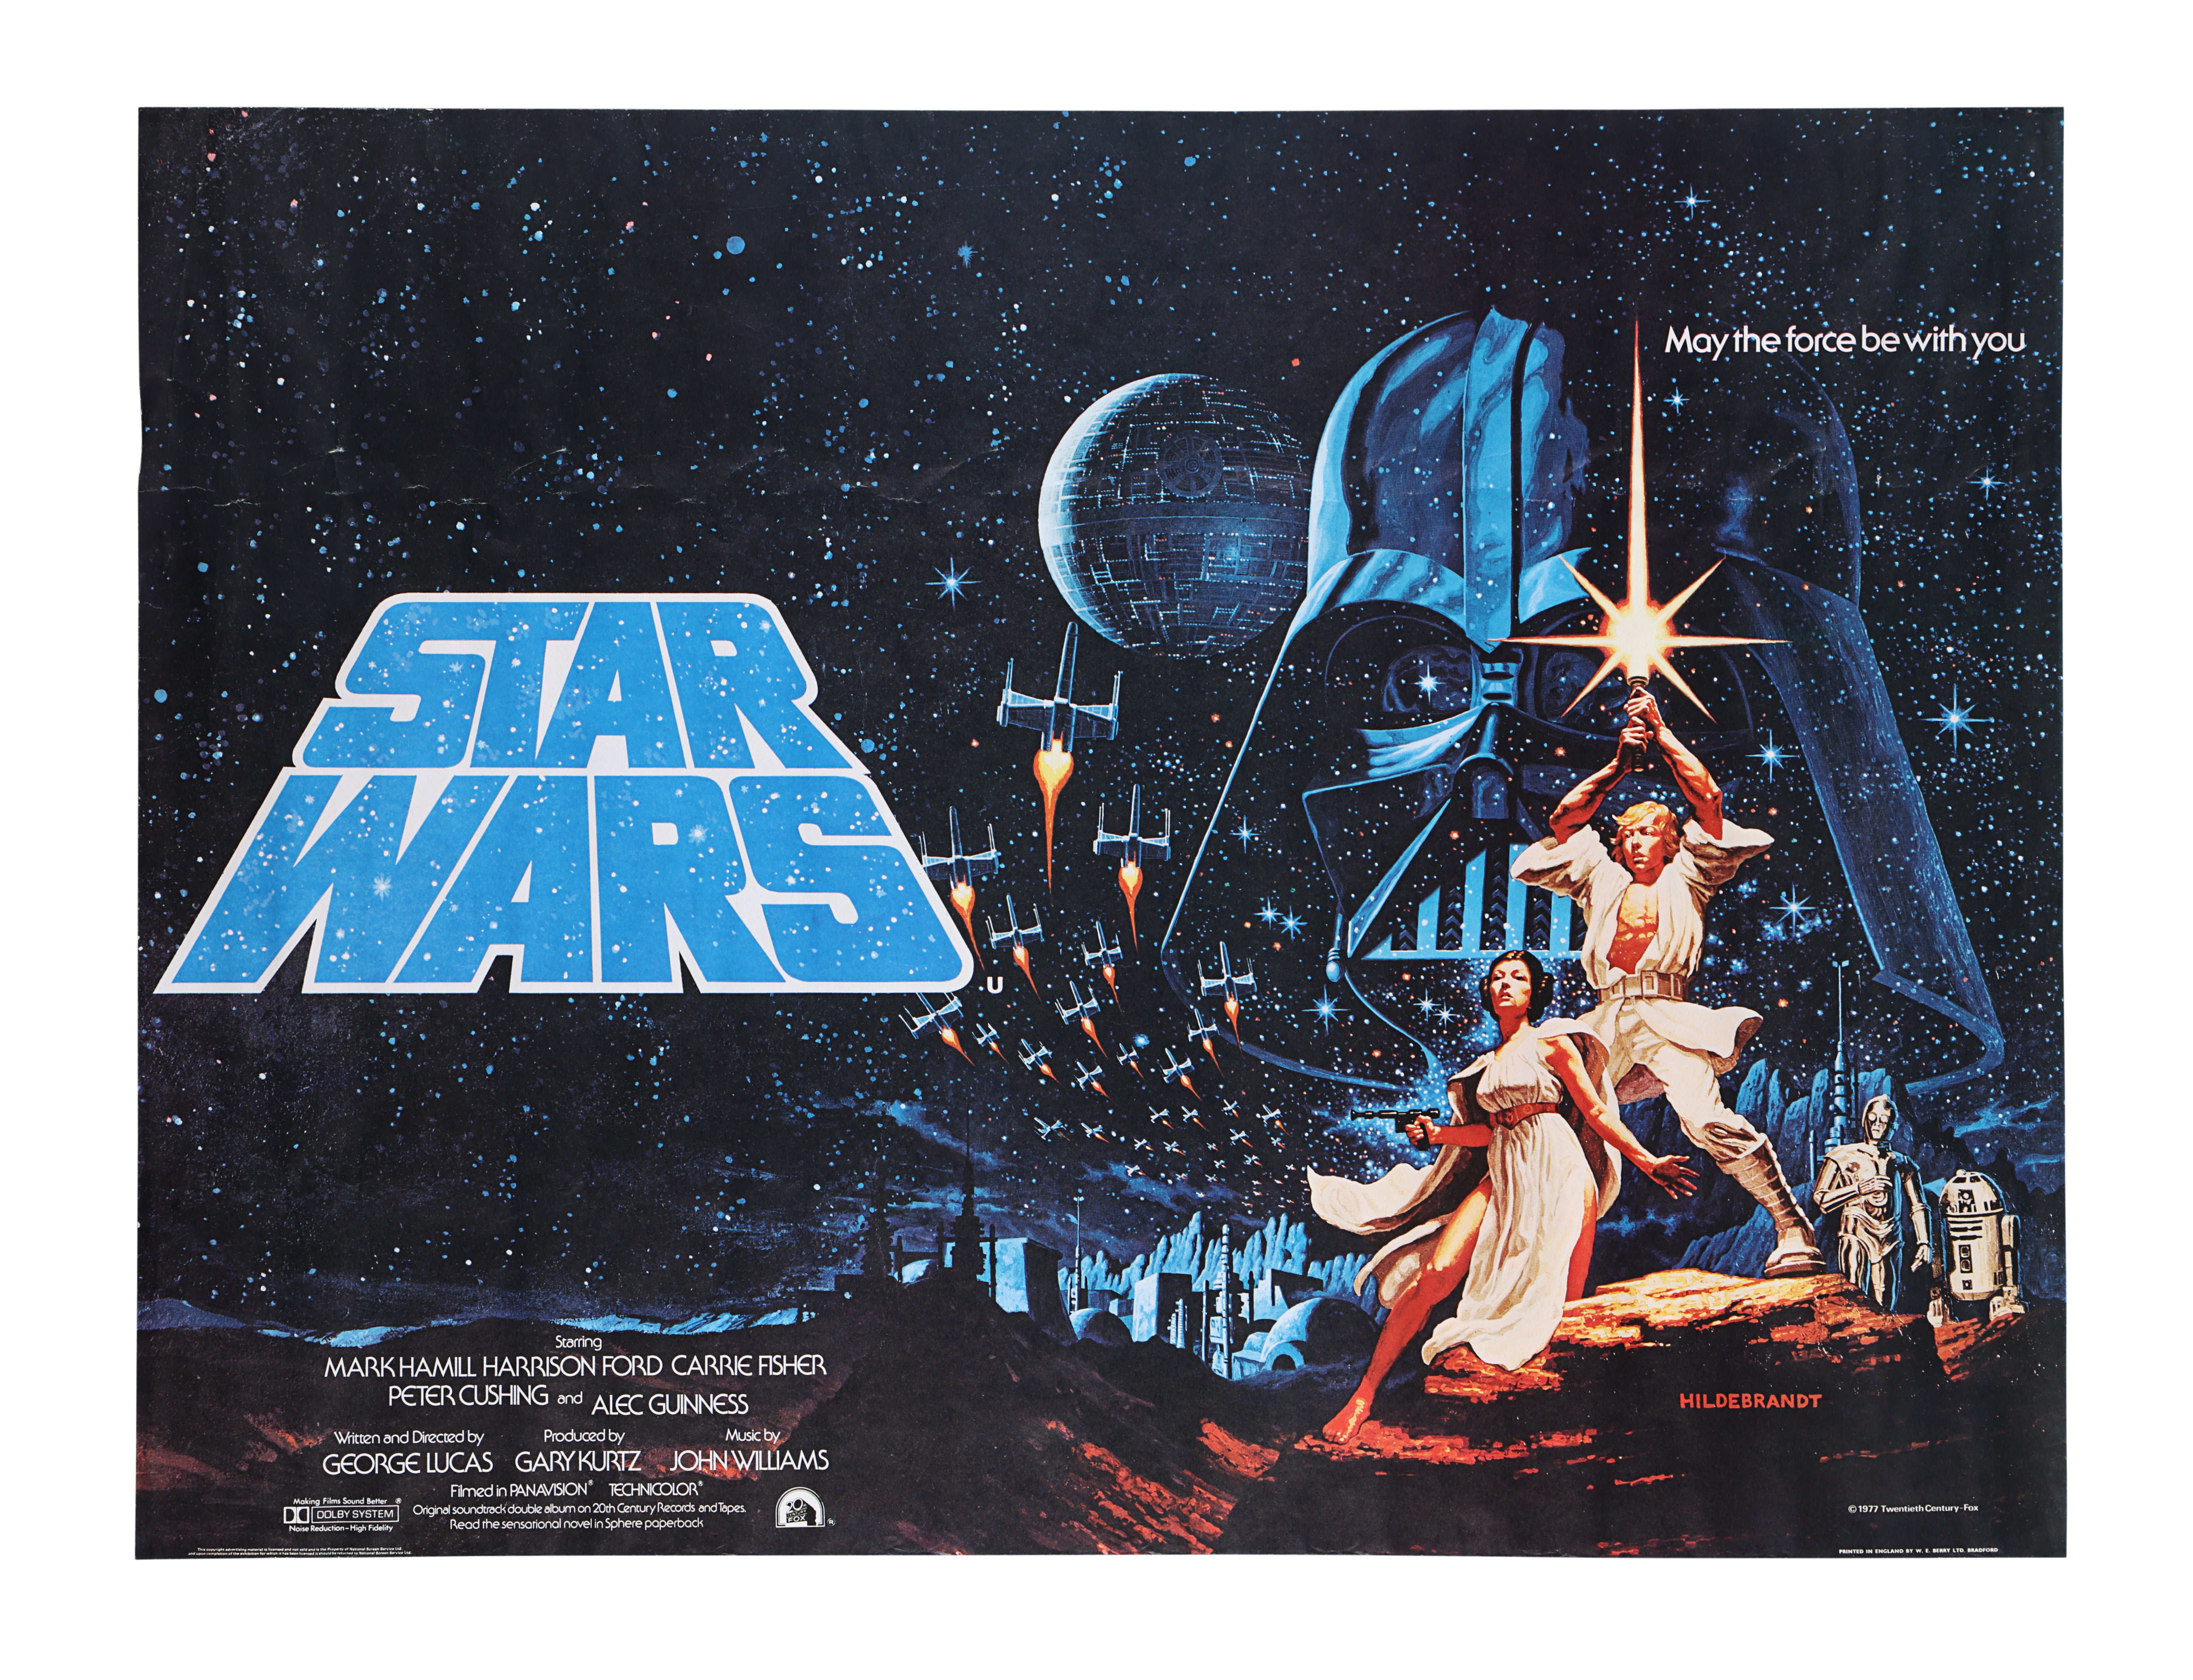 The rare Star Wars poster (The Prop Store/PA)